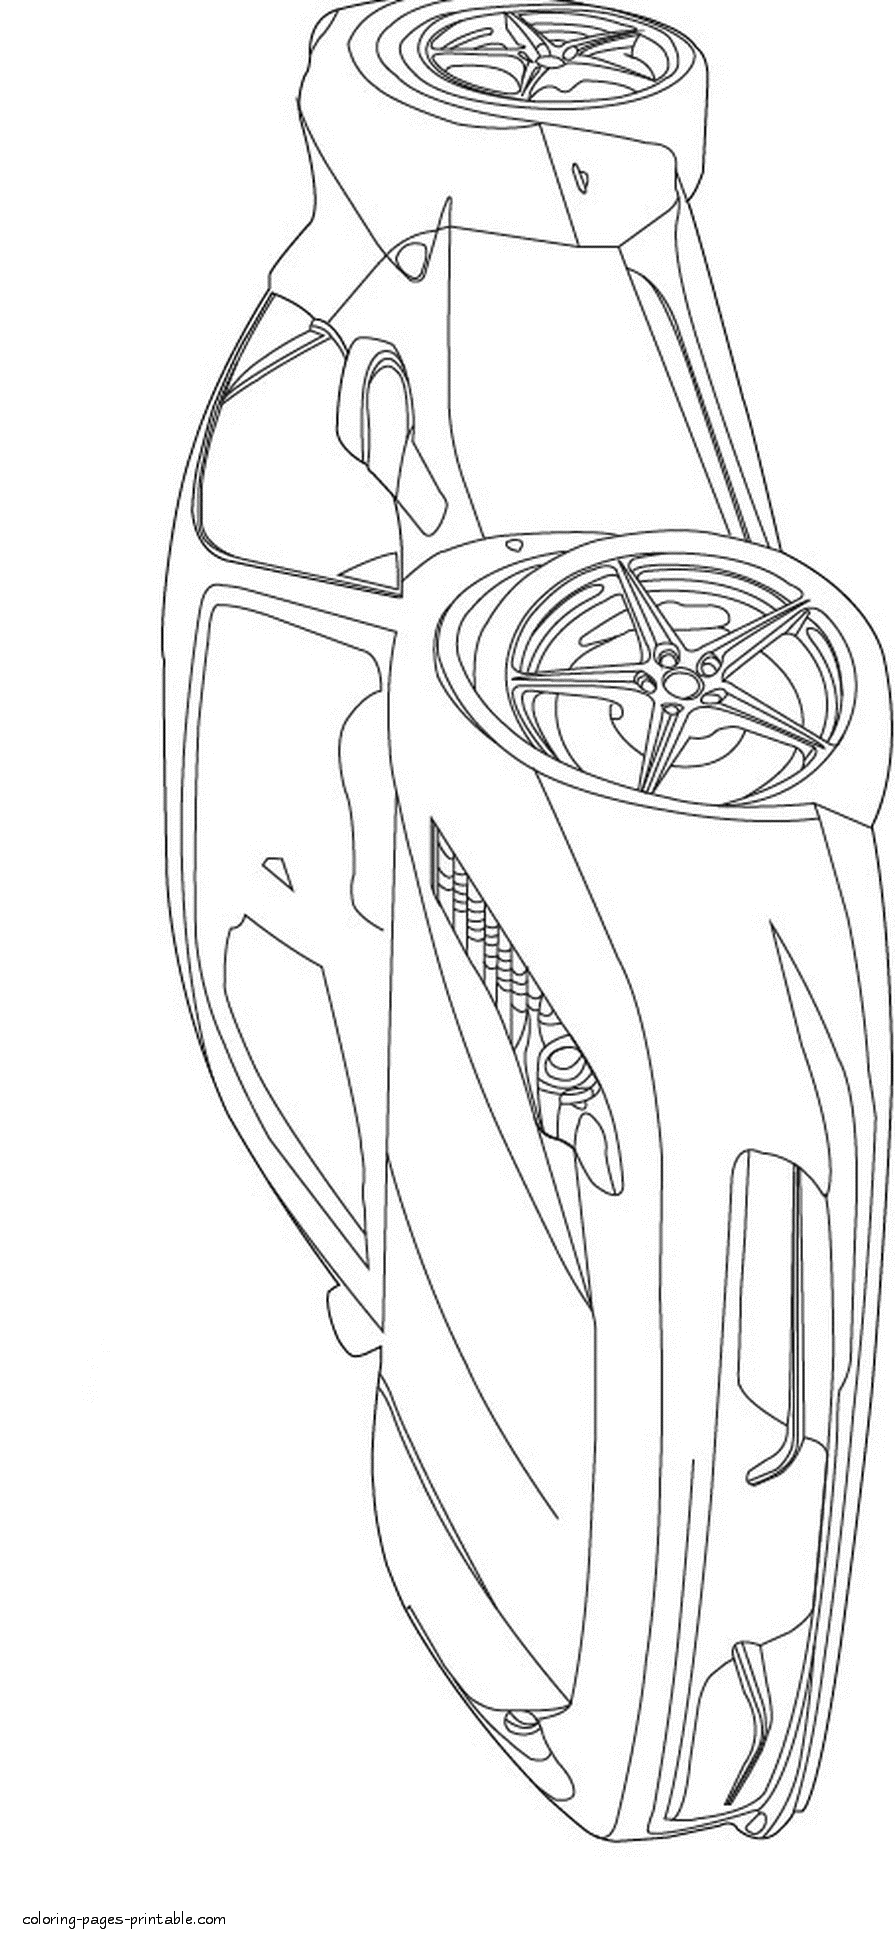 Ferrari Coloring Pages Free